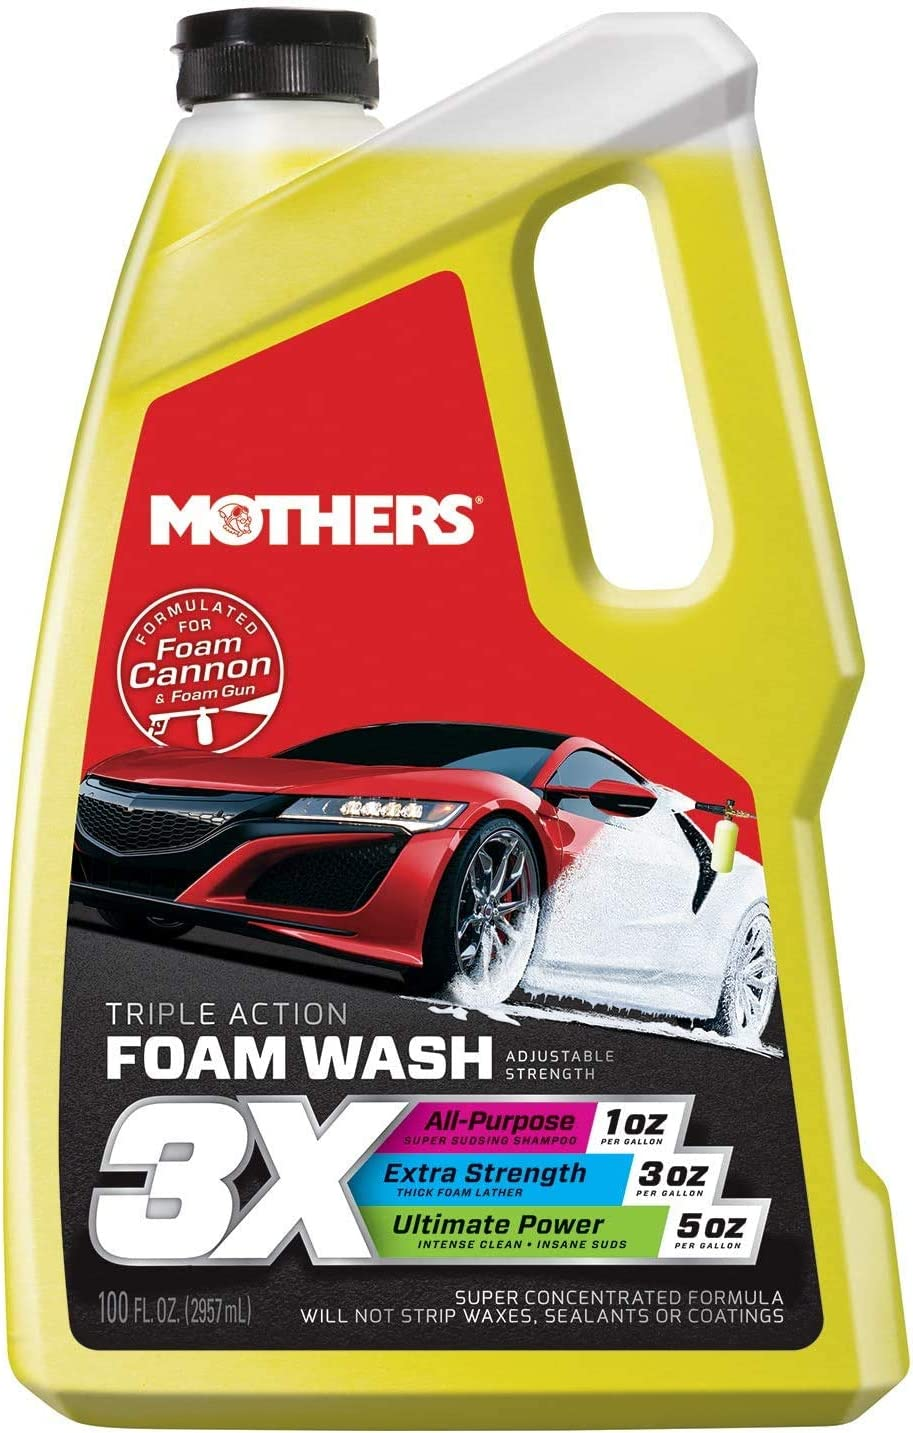 100oz Mothers 3X Triple Action Foam Car Wash, formulated for foam cannons, $6.49, Amazon, OOS but can order